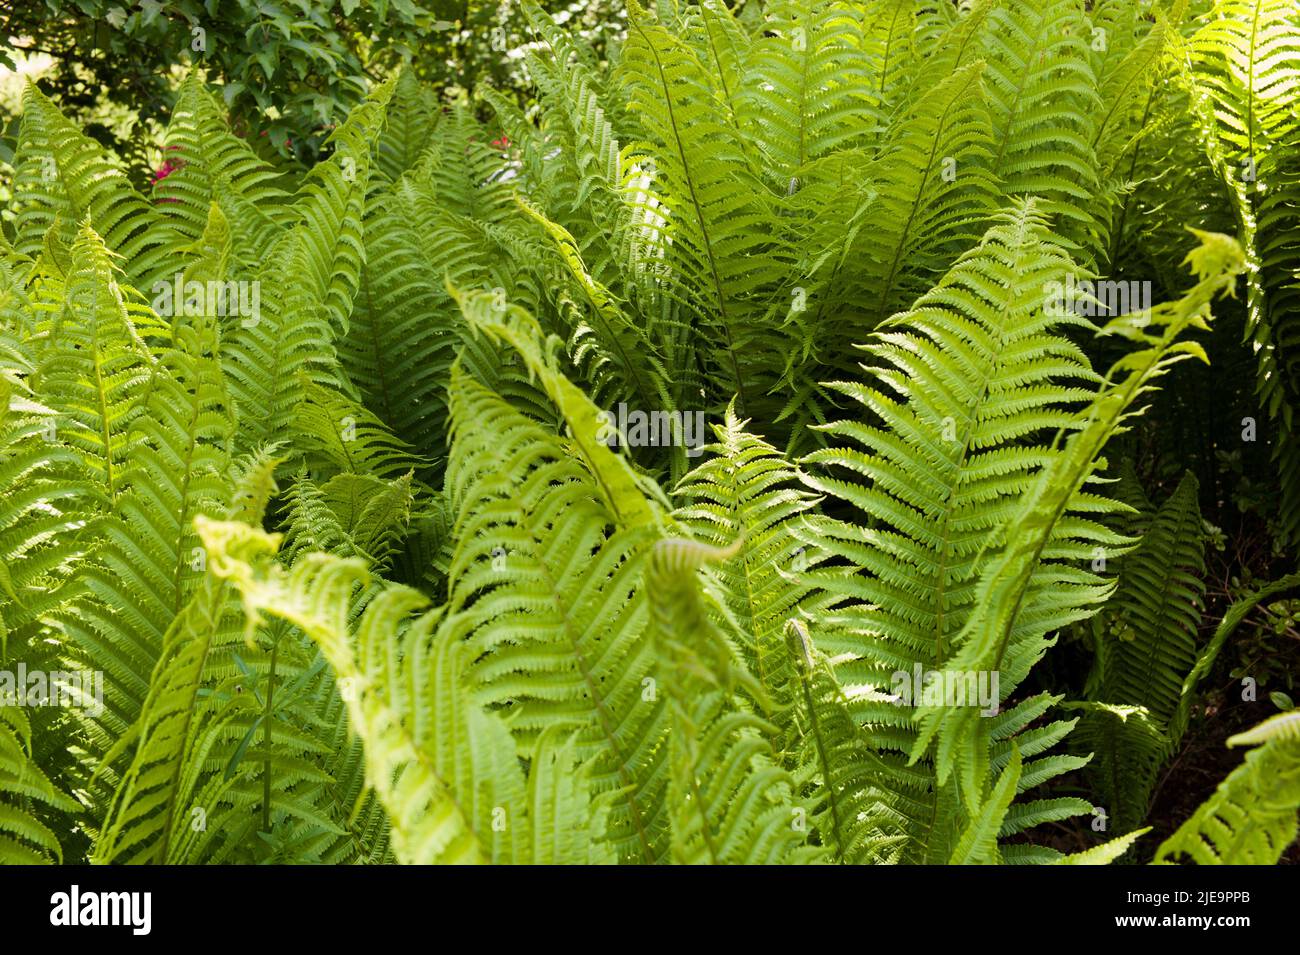 A group of ferns in a garden Stock Photo